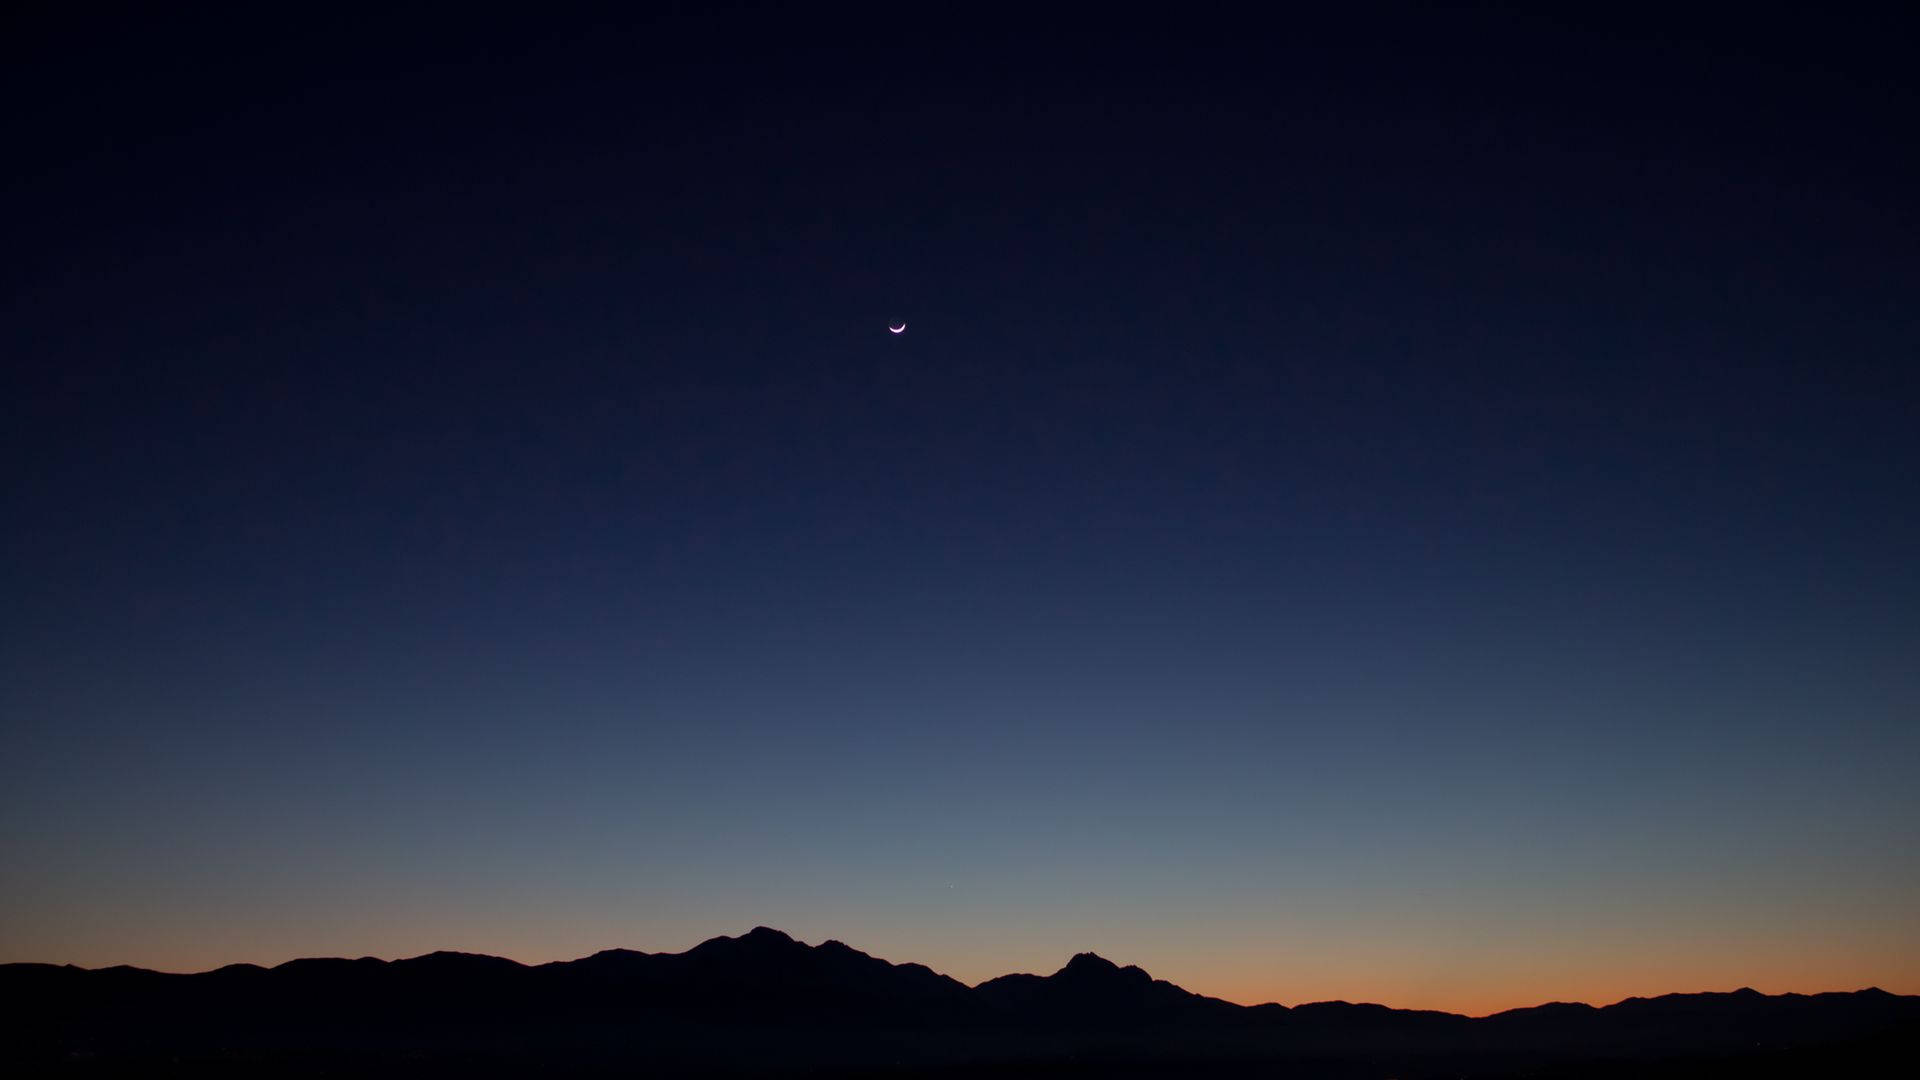 A Moon And A Crescent Are Seen Over The Mountains Background